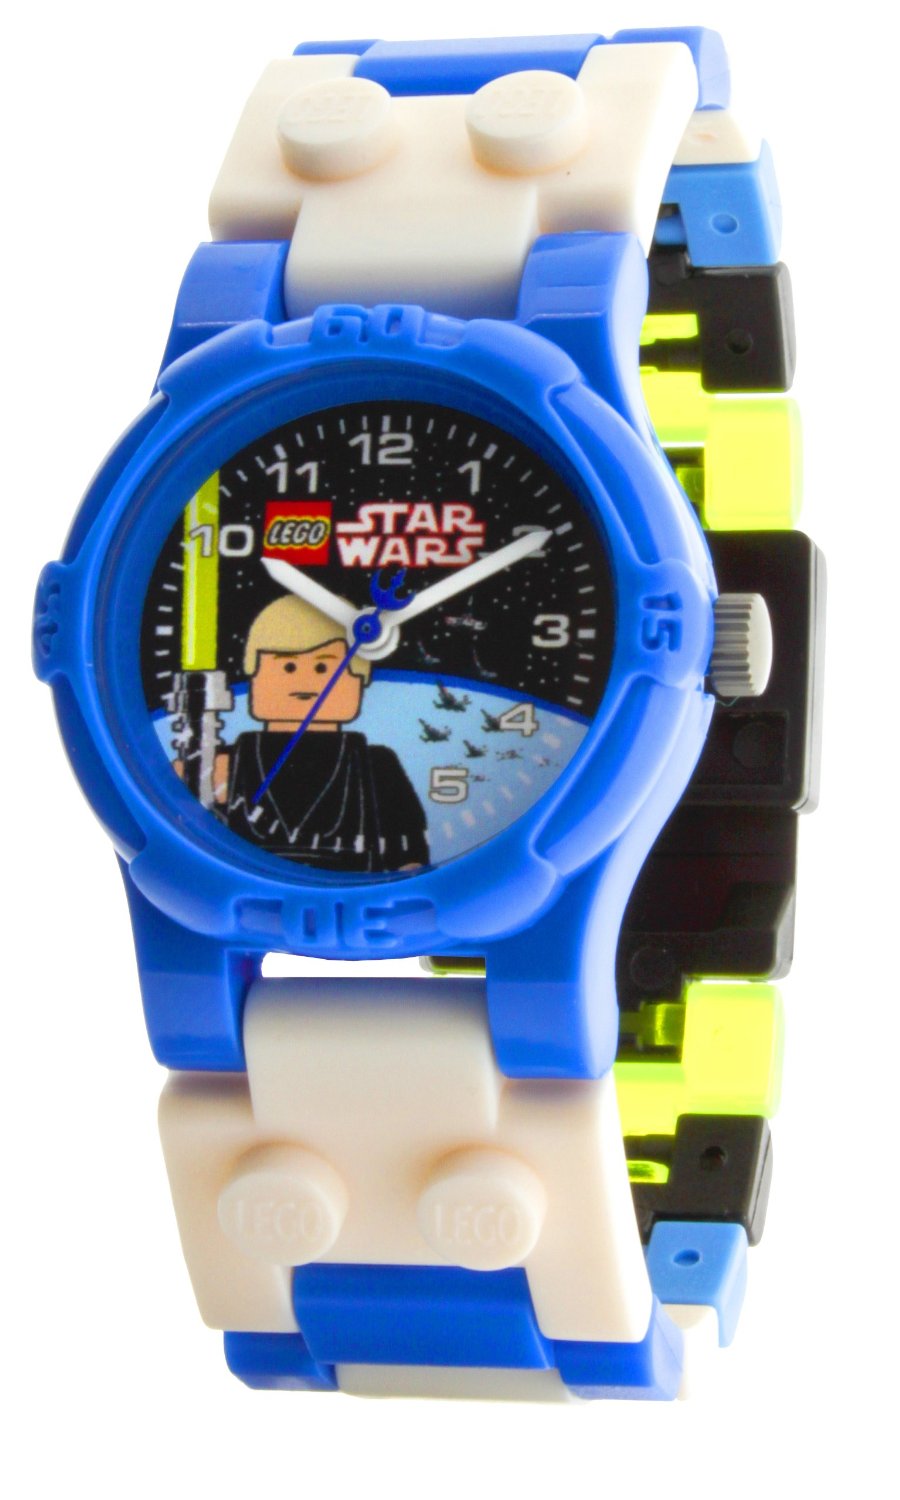 LEGO Kids' 9002892 Star Wars Plastic Watch with Link Bracelet and Minifigure  $13.99